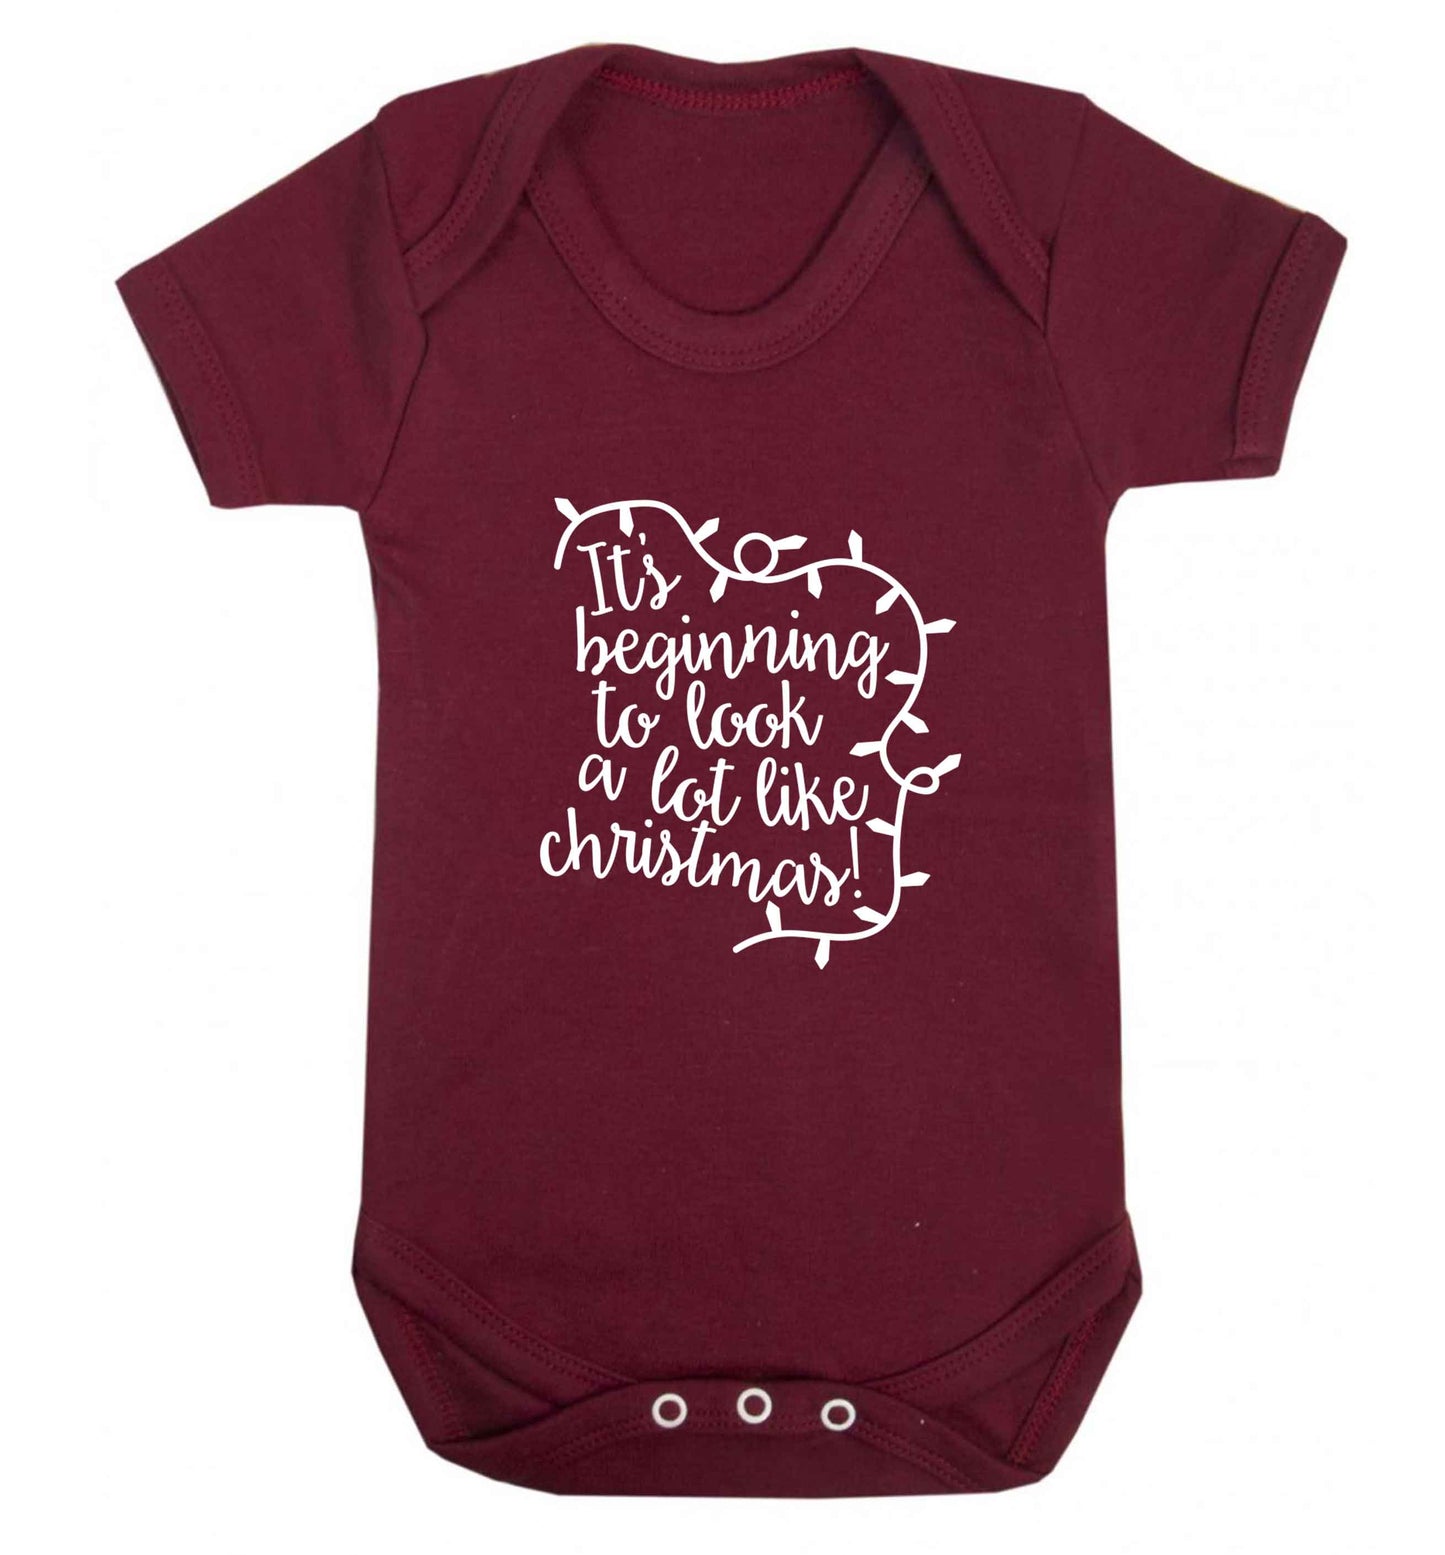 It's beginning to look a lot like Christmas baby vest maroon 18-24 months